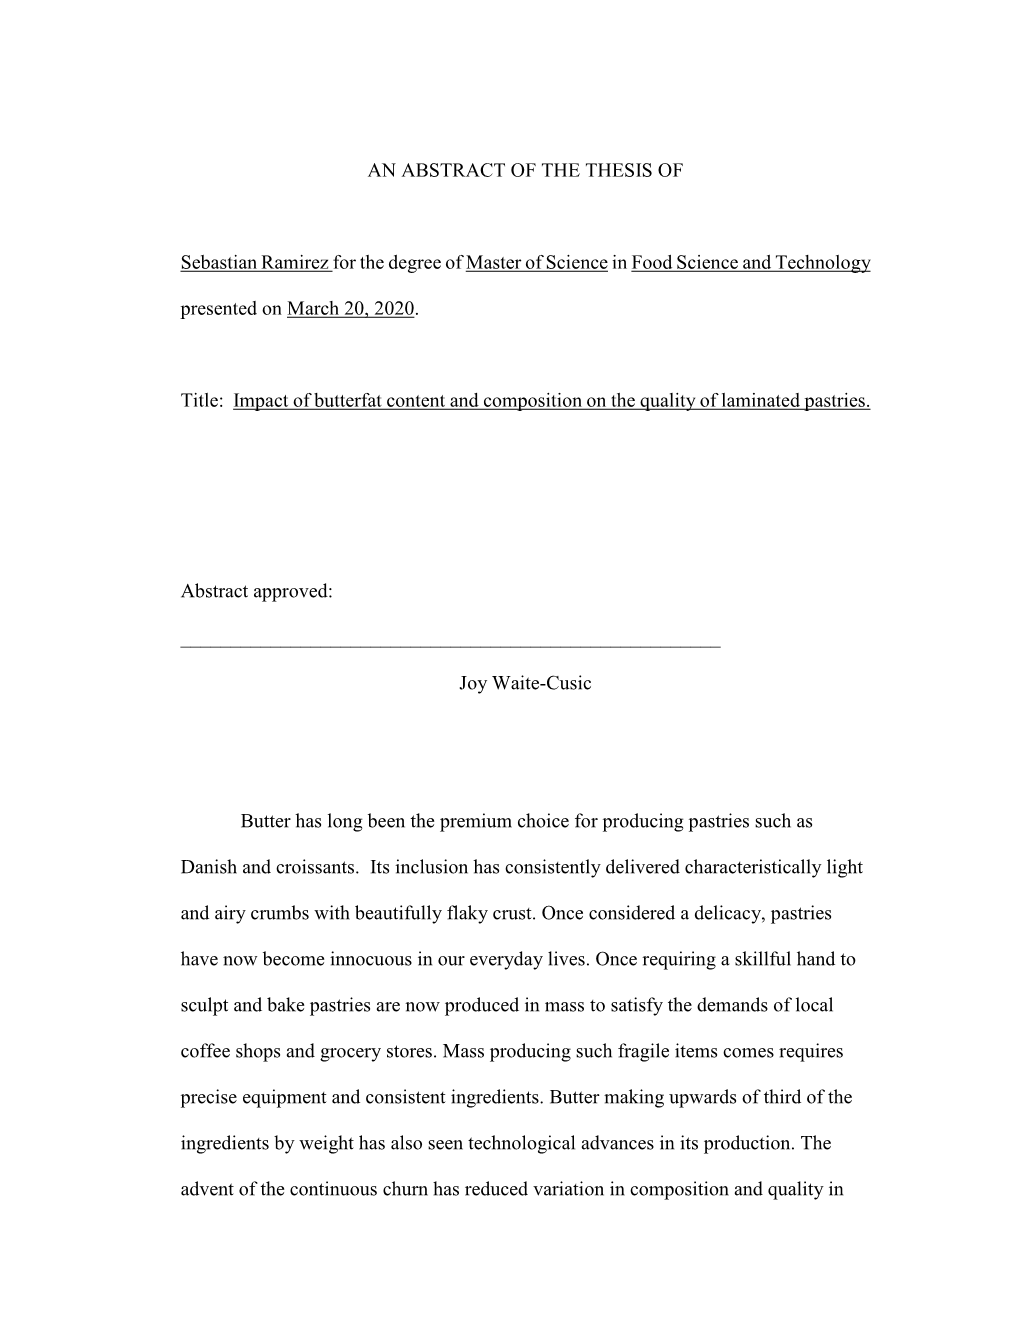 AN ABSTRACT of the THESIS of Sebastian Ramirez for the Degree